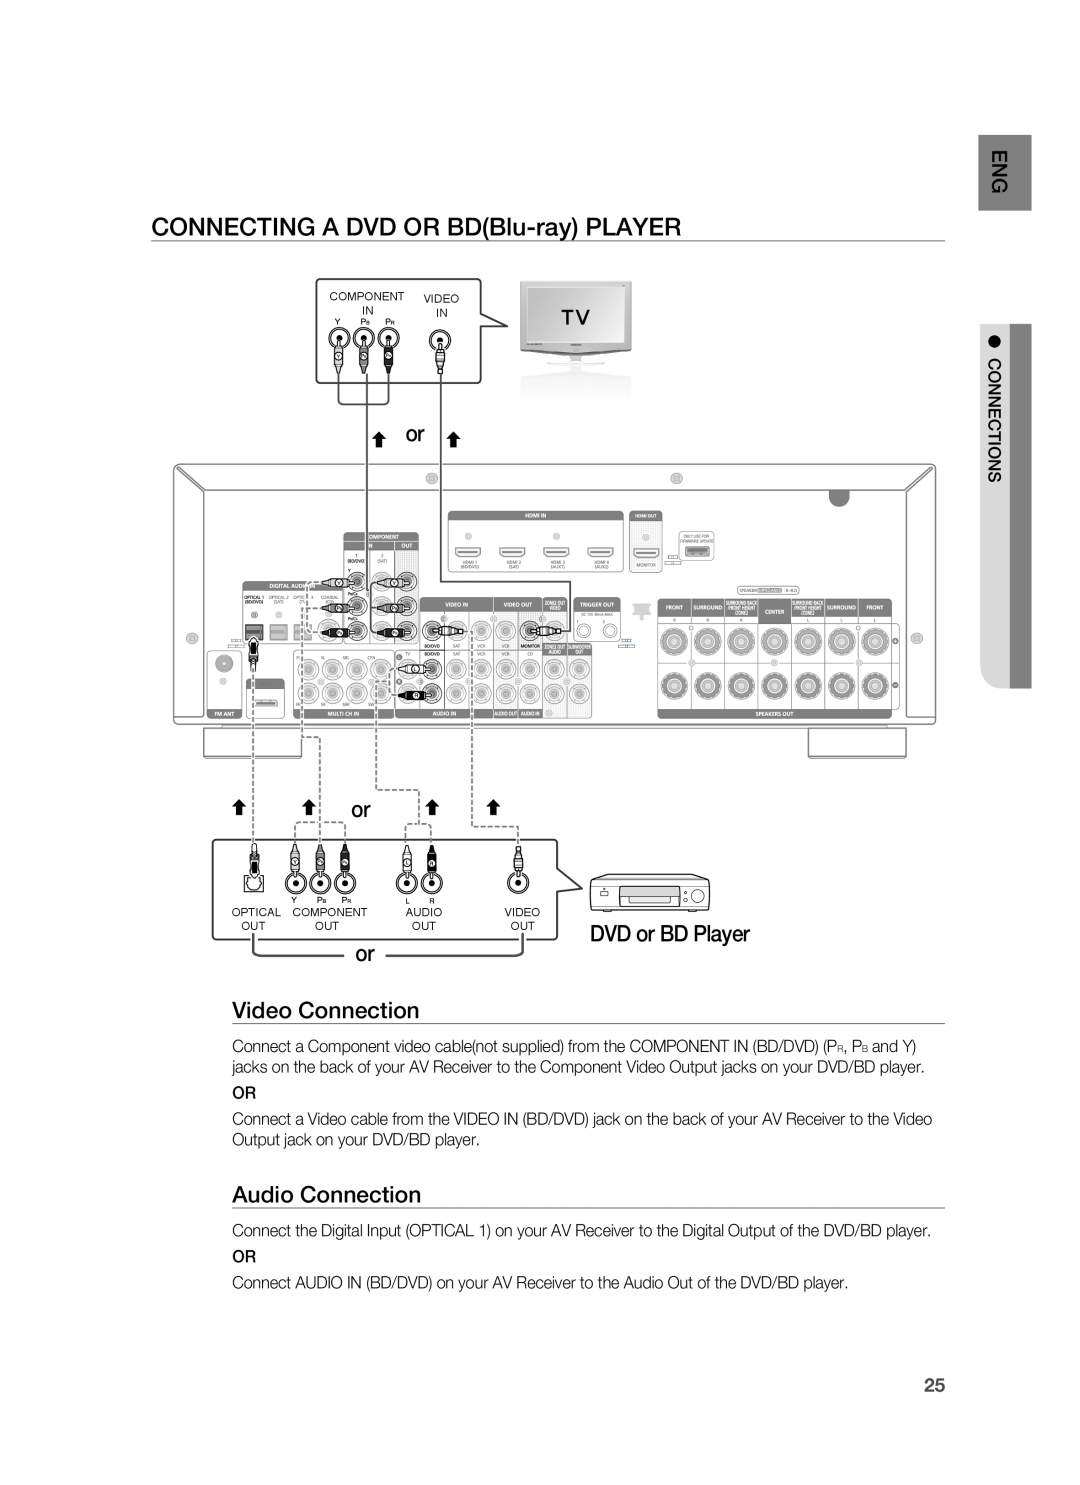 Samsung HW-C900-XAA user manual CONNECTING A DVD OR BDBlu-rayPLAYER, DVD or BD Player, Video Connection, Audio Connection 